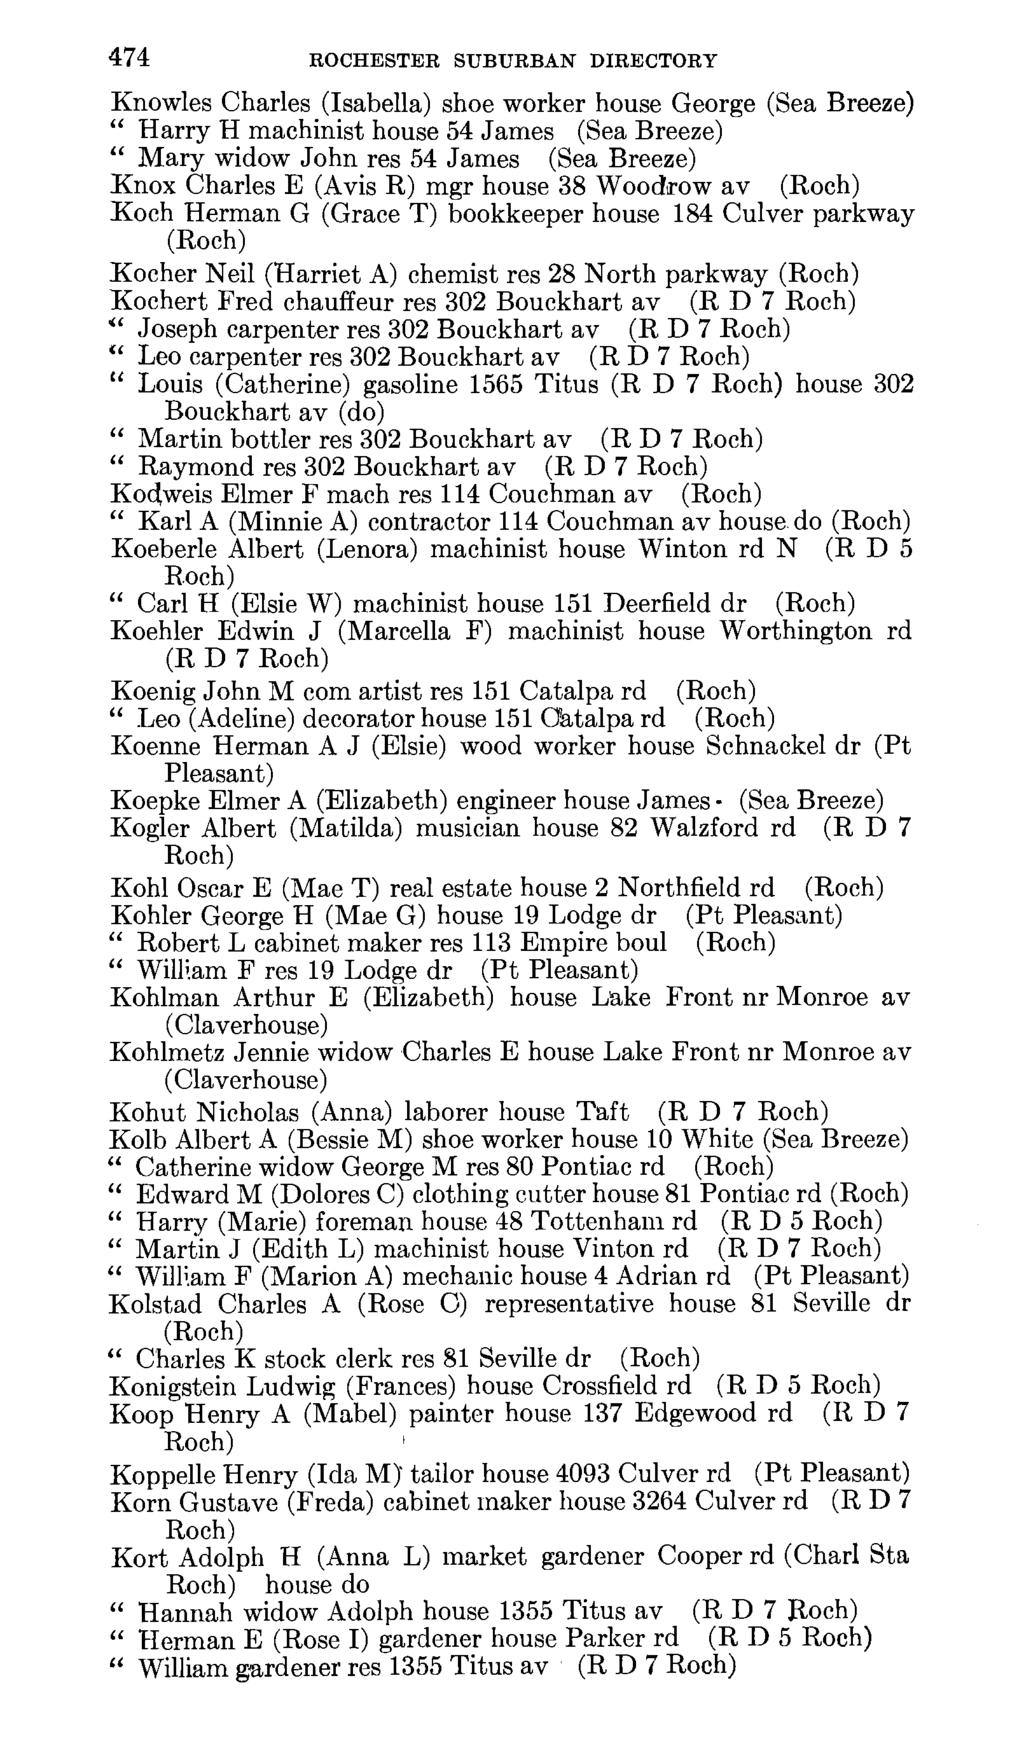 474 ROCHESTER SUBURBAN DIRECTORY Knowles Charles (Isabella) shoe worker house George (Sea Breeze) Harry H machinist house 54 James (Sea Breeze) Mary widow John res 54 James (Sea Breeze) Knox Charles